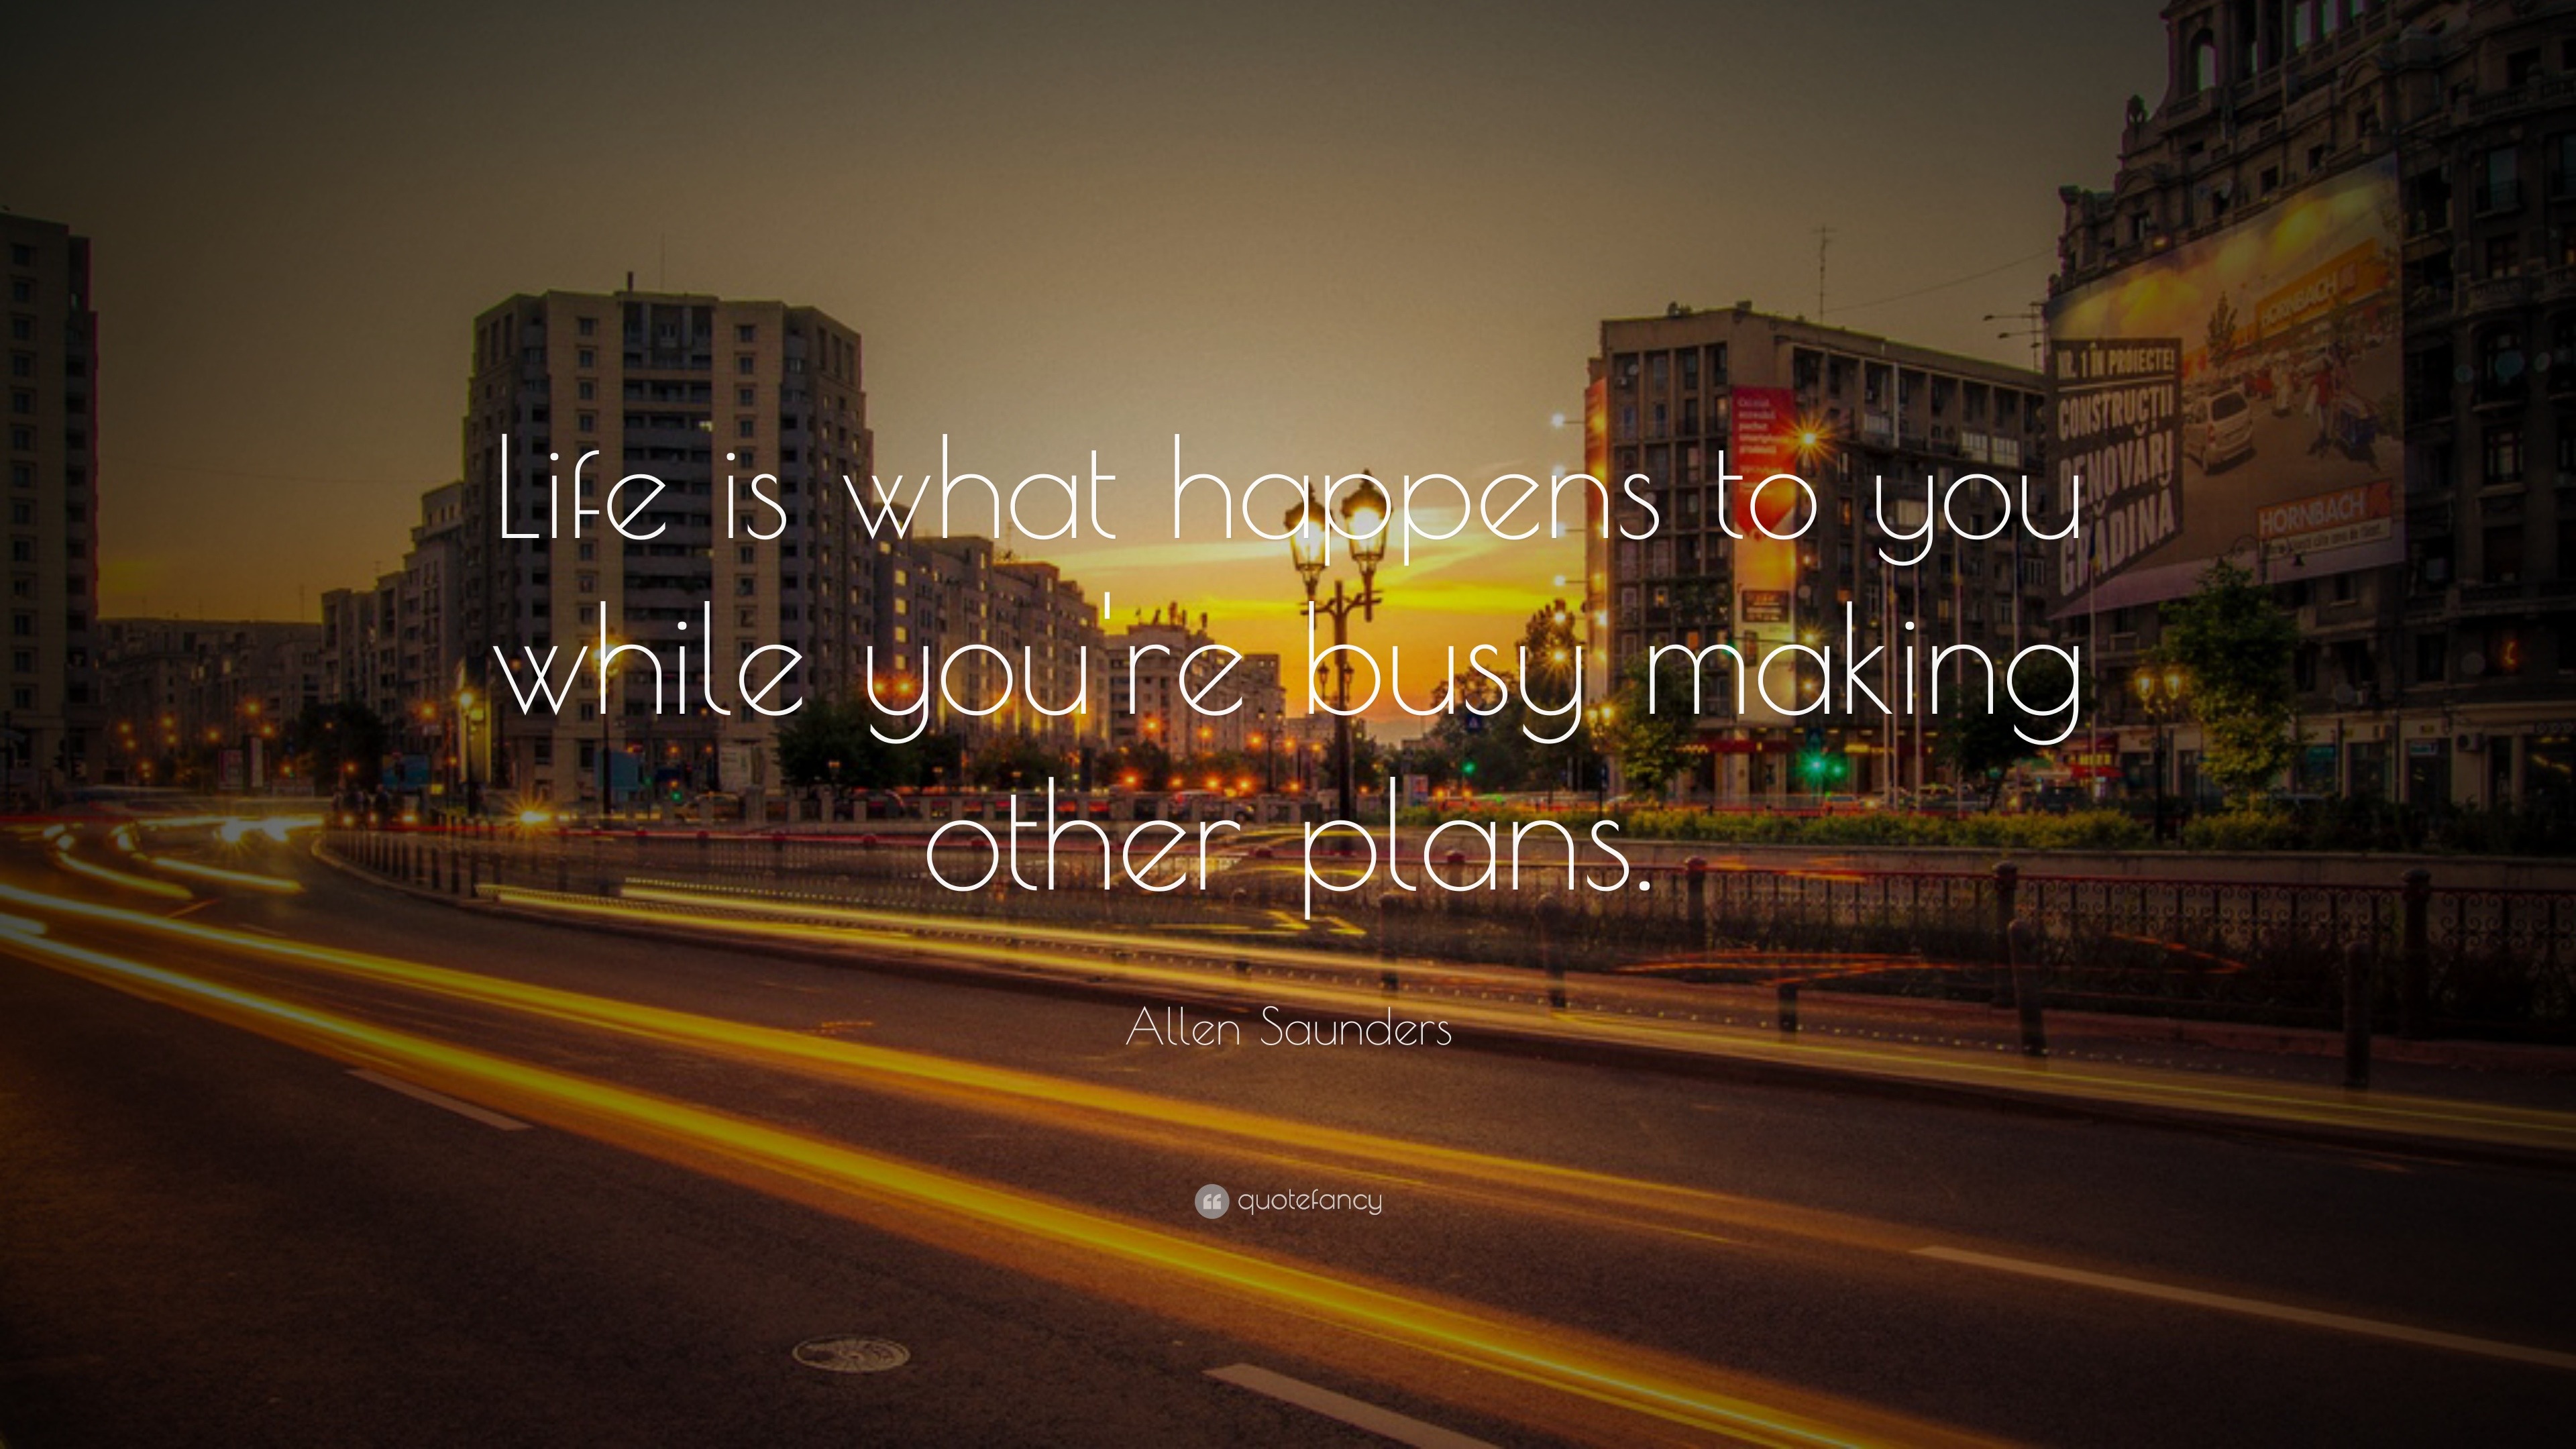 Allen Saunders Quote: “Life is what happens to you while you’re busy ...